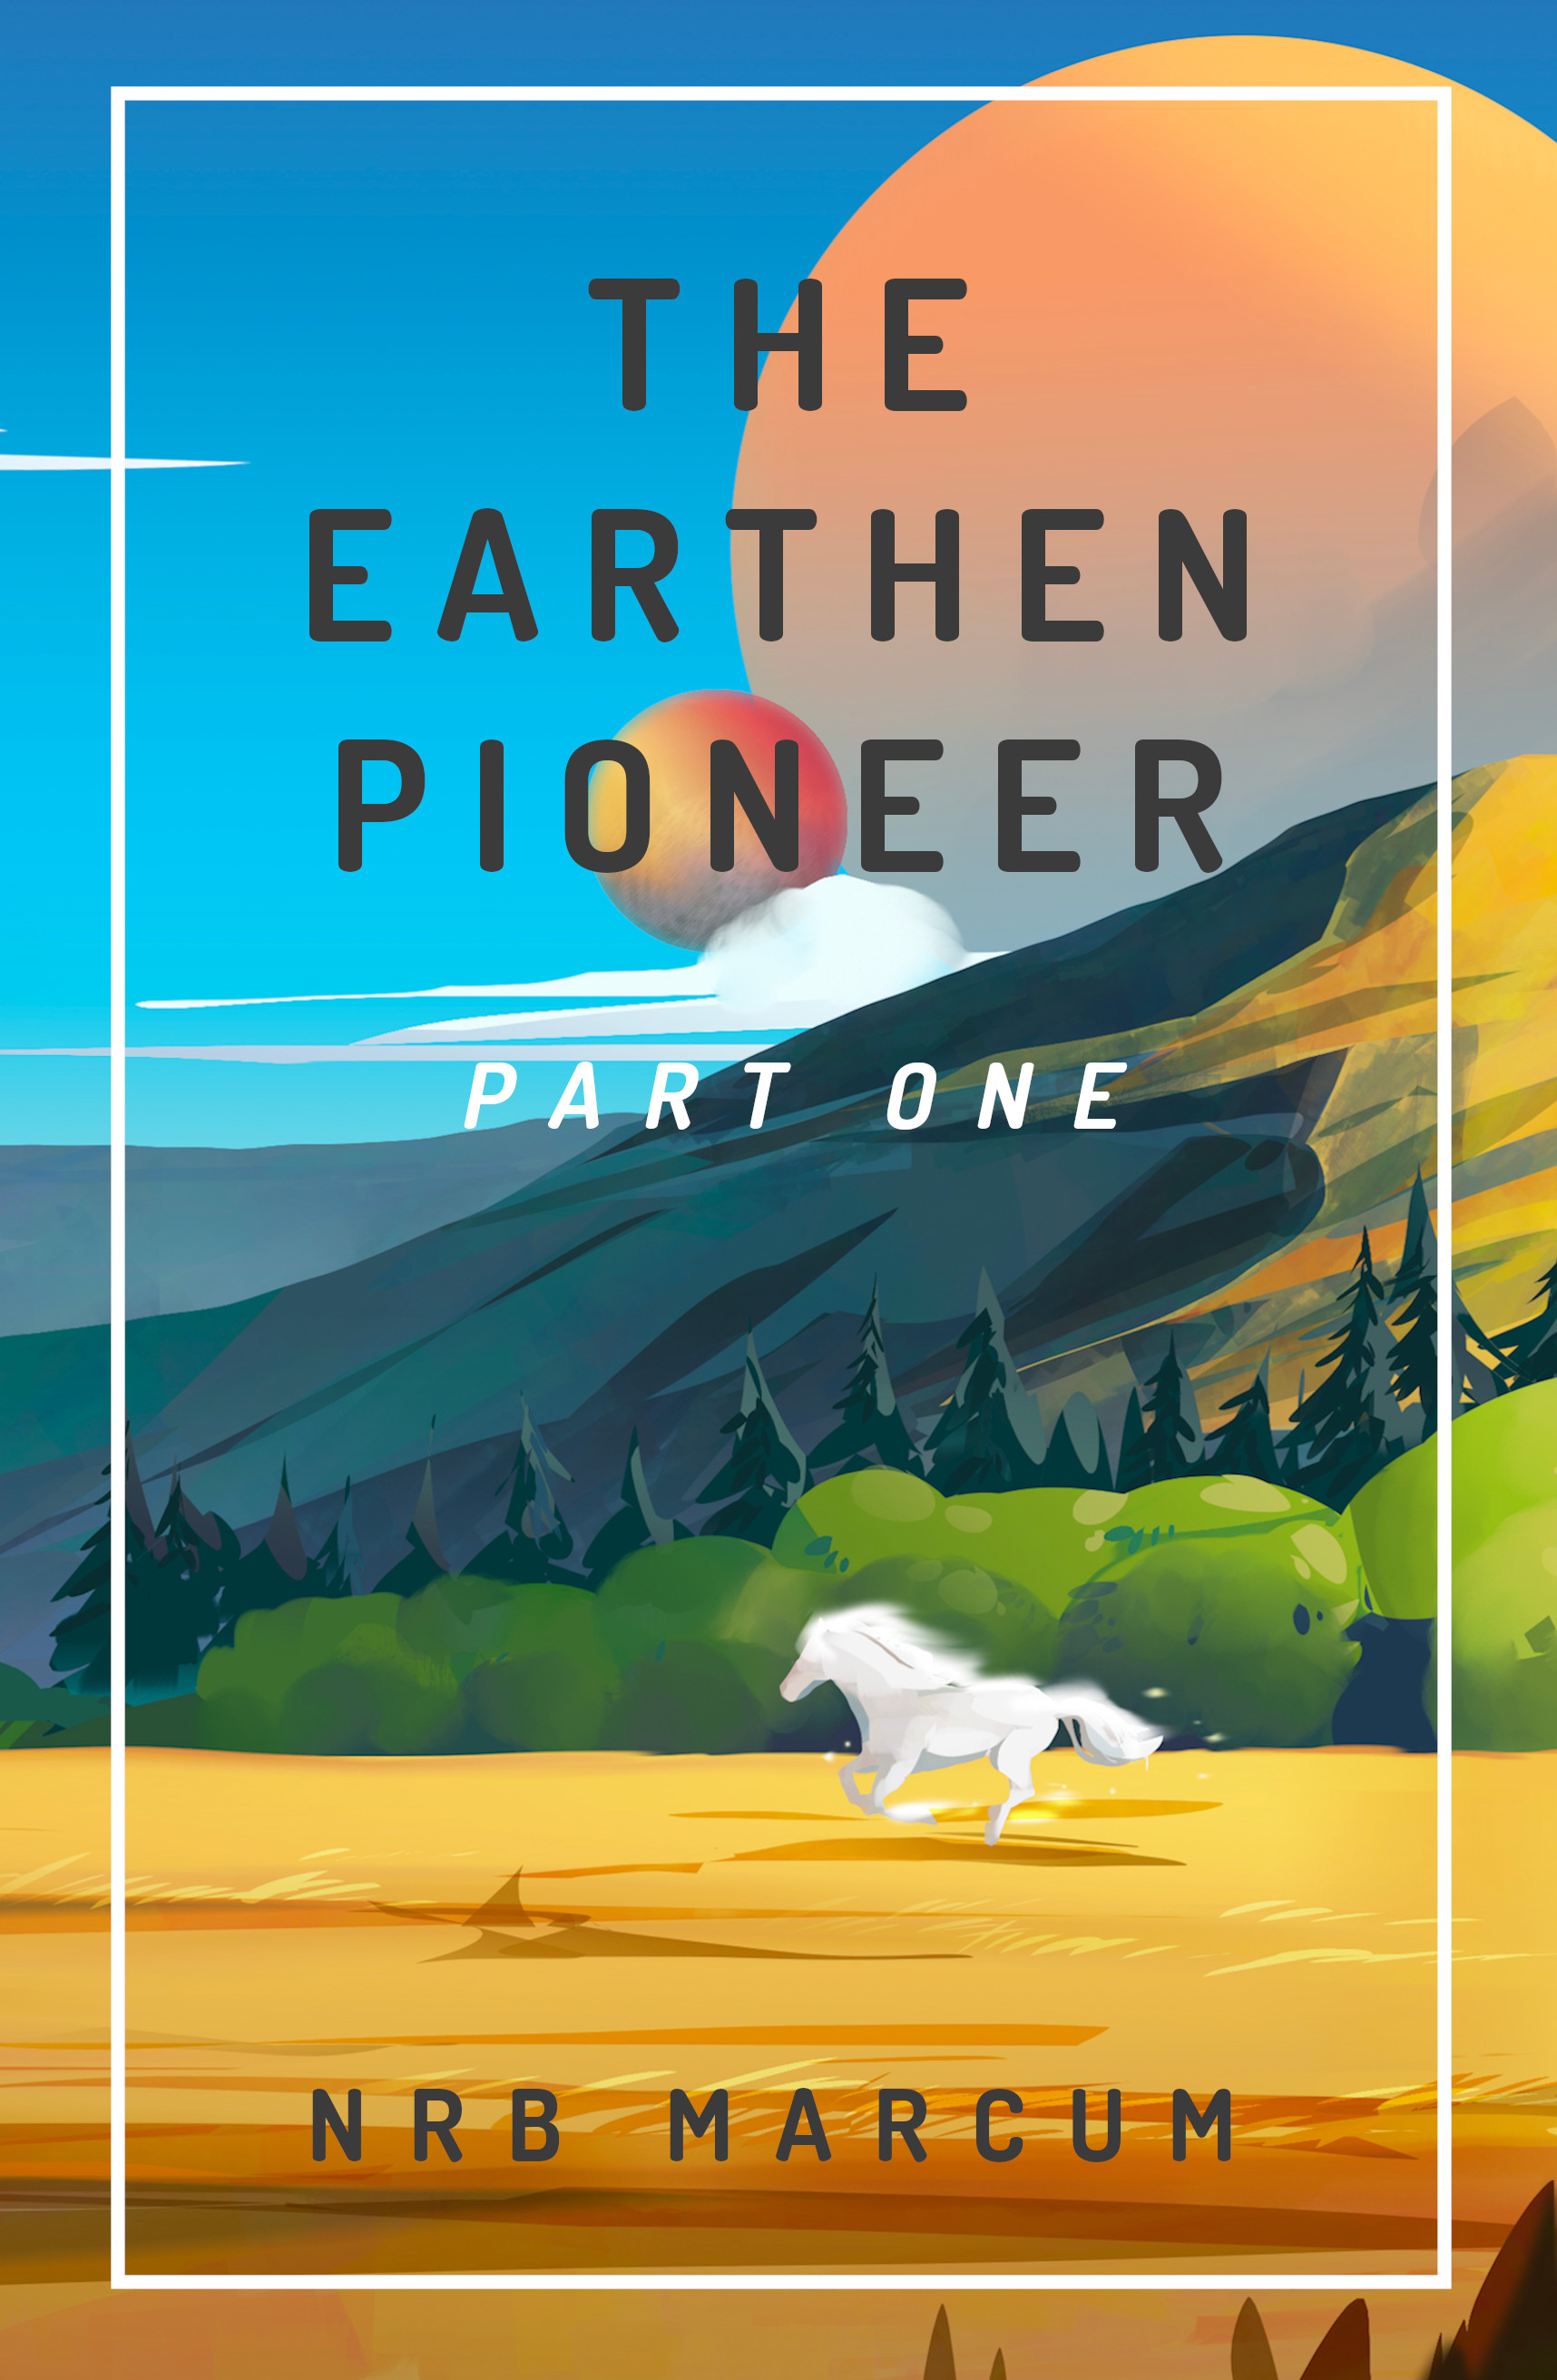 Cover of N.R.B. Markcum's science fiction novel The Earthen Pioneer: Part 1